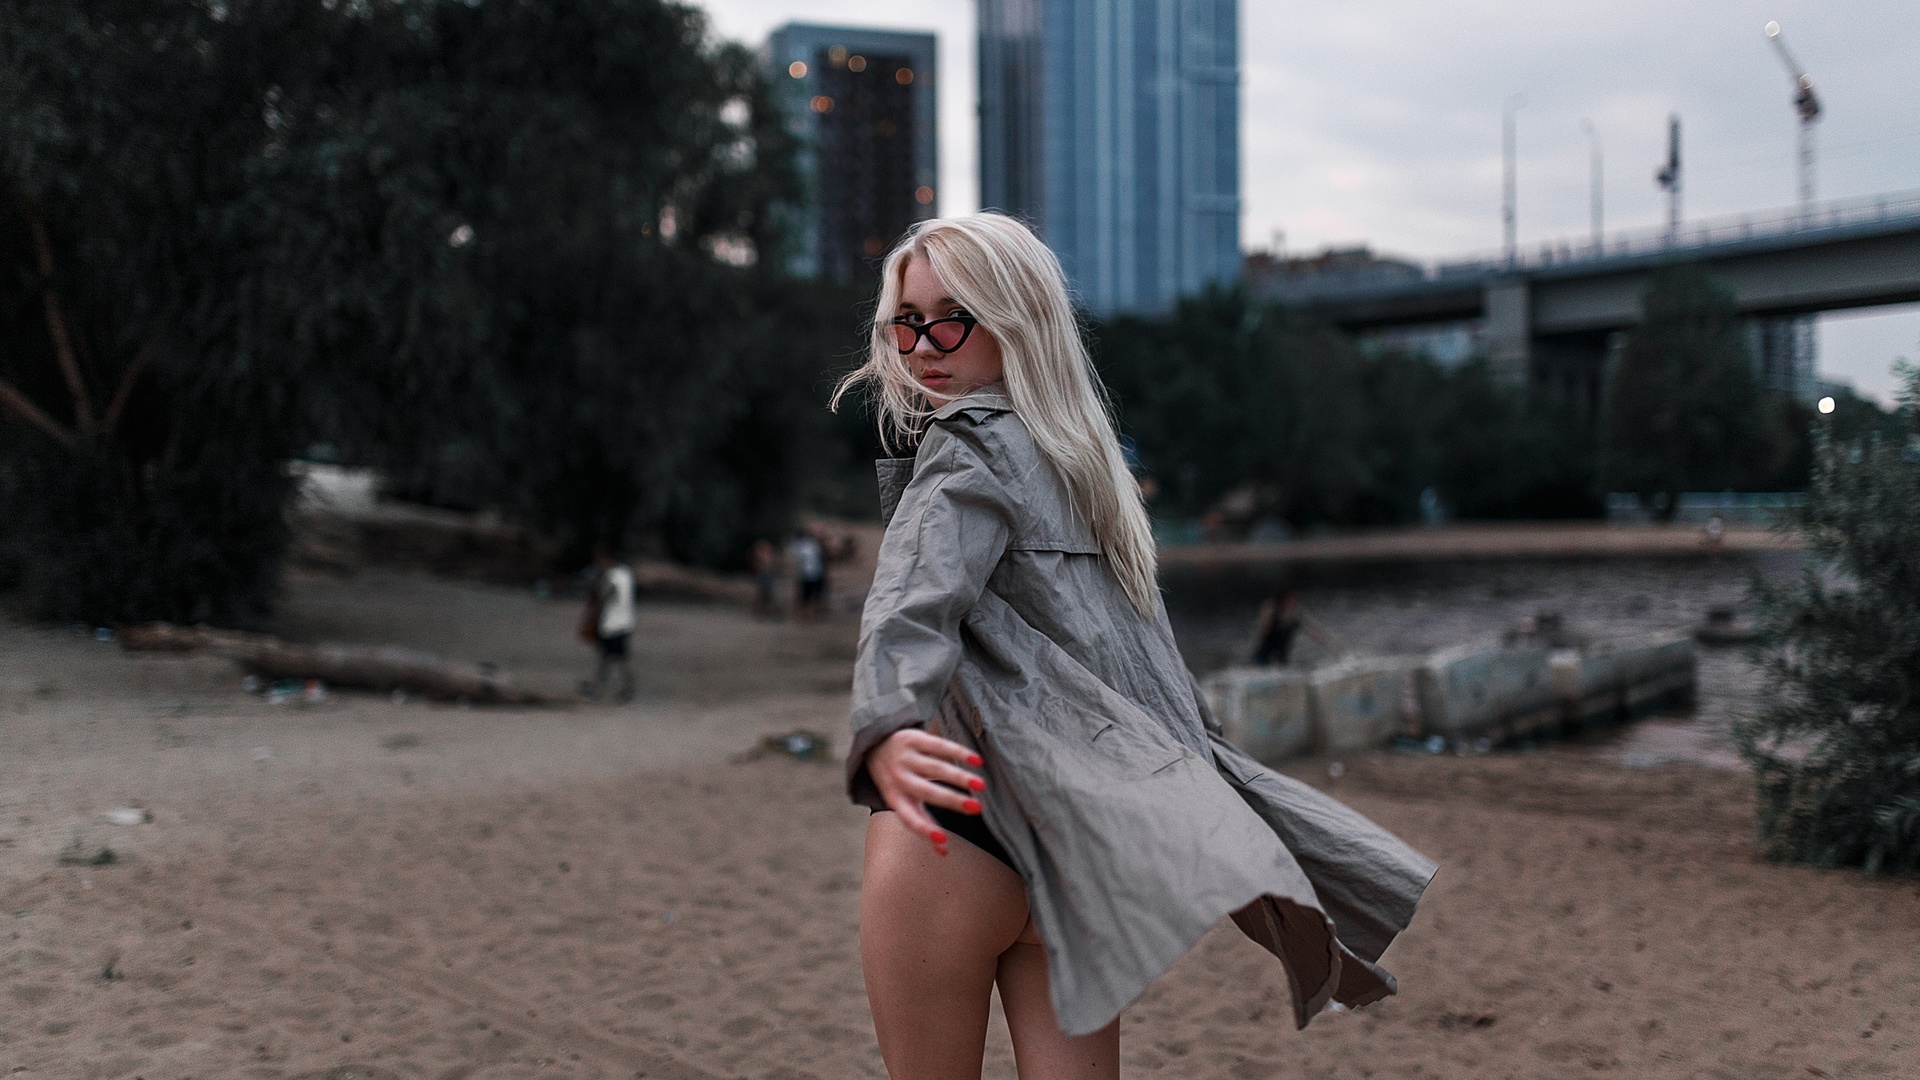 women, blonde, sand, red nails, ass, women with glasses, building, bridge, one-piece swimsuit, women outdoors